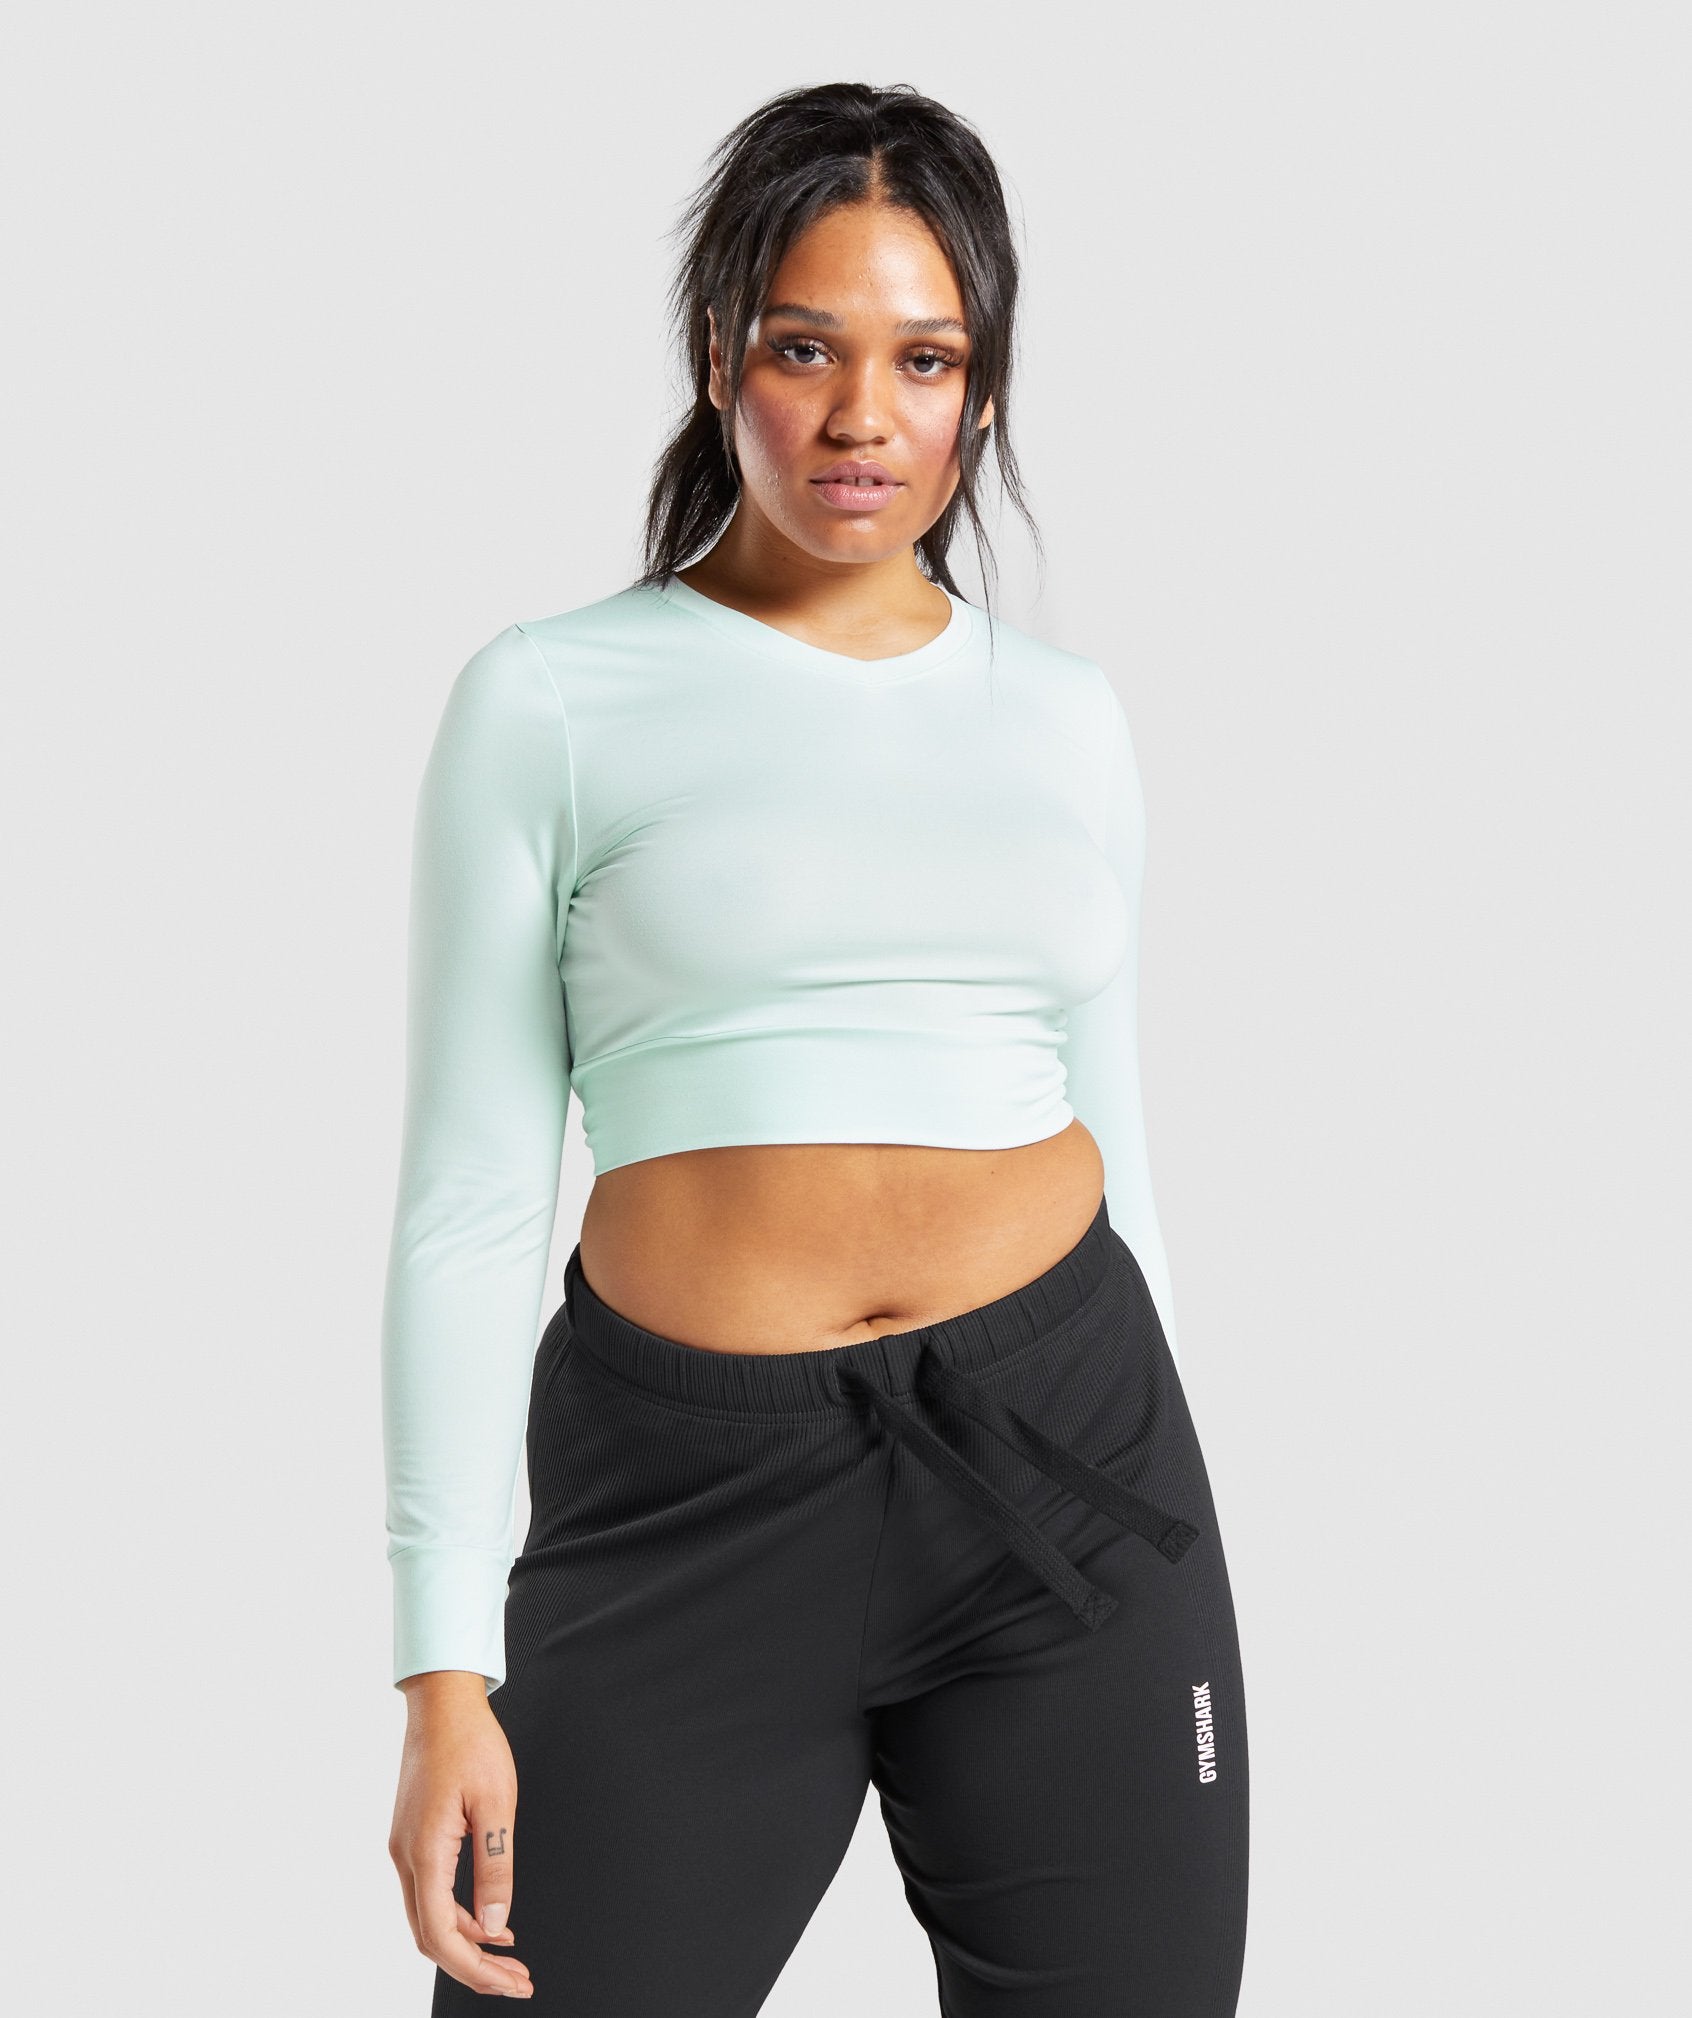 Pause Open Back Long Sleeve Crop Top